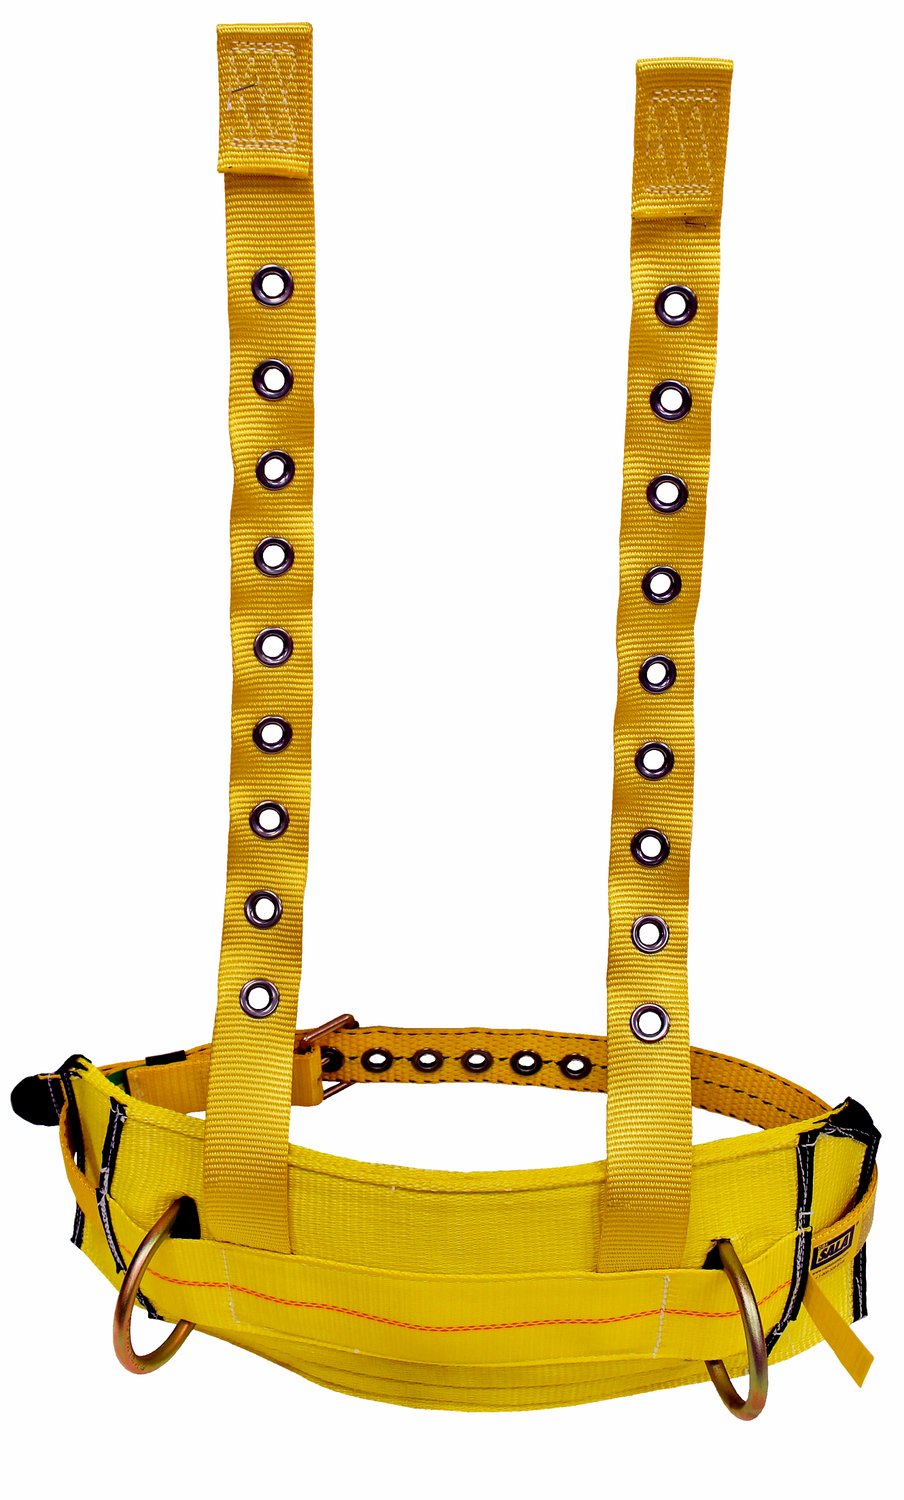 7012815133 - 3M DBI-SALA Derrick Tongue Buckle Positioning Belt with Tongue Buckle Harness Connector 1003223, Yellow, 2X